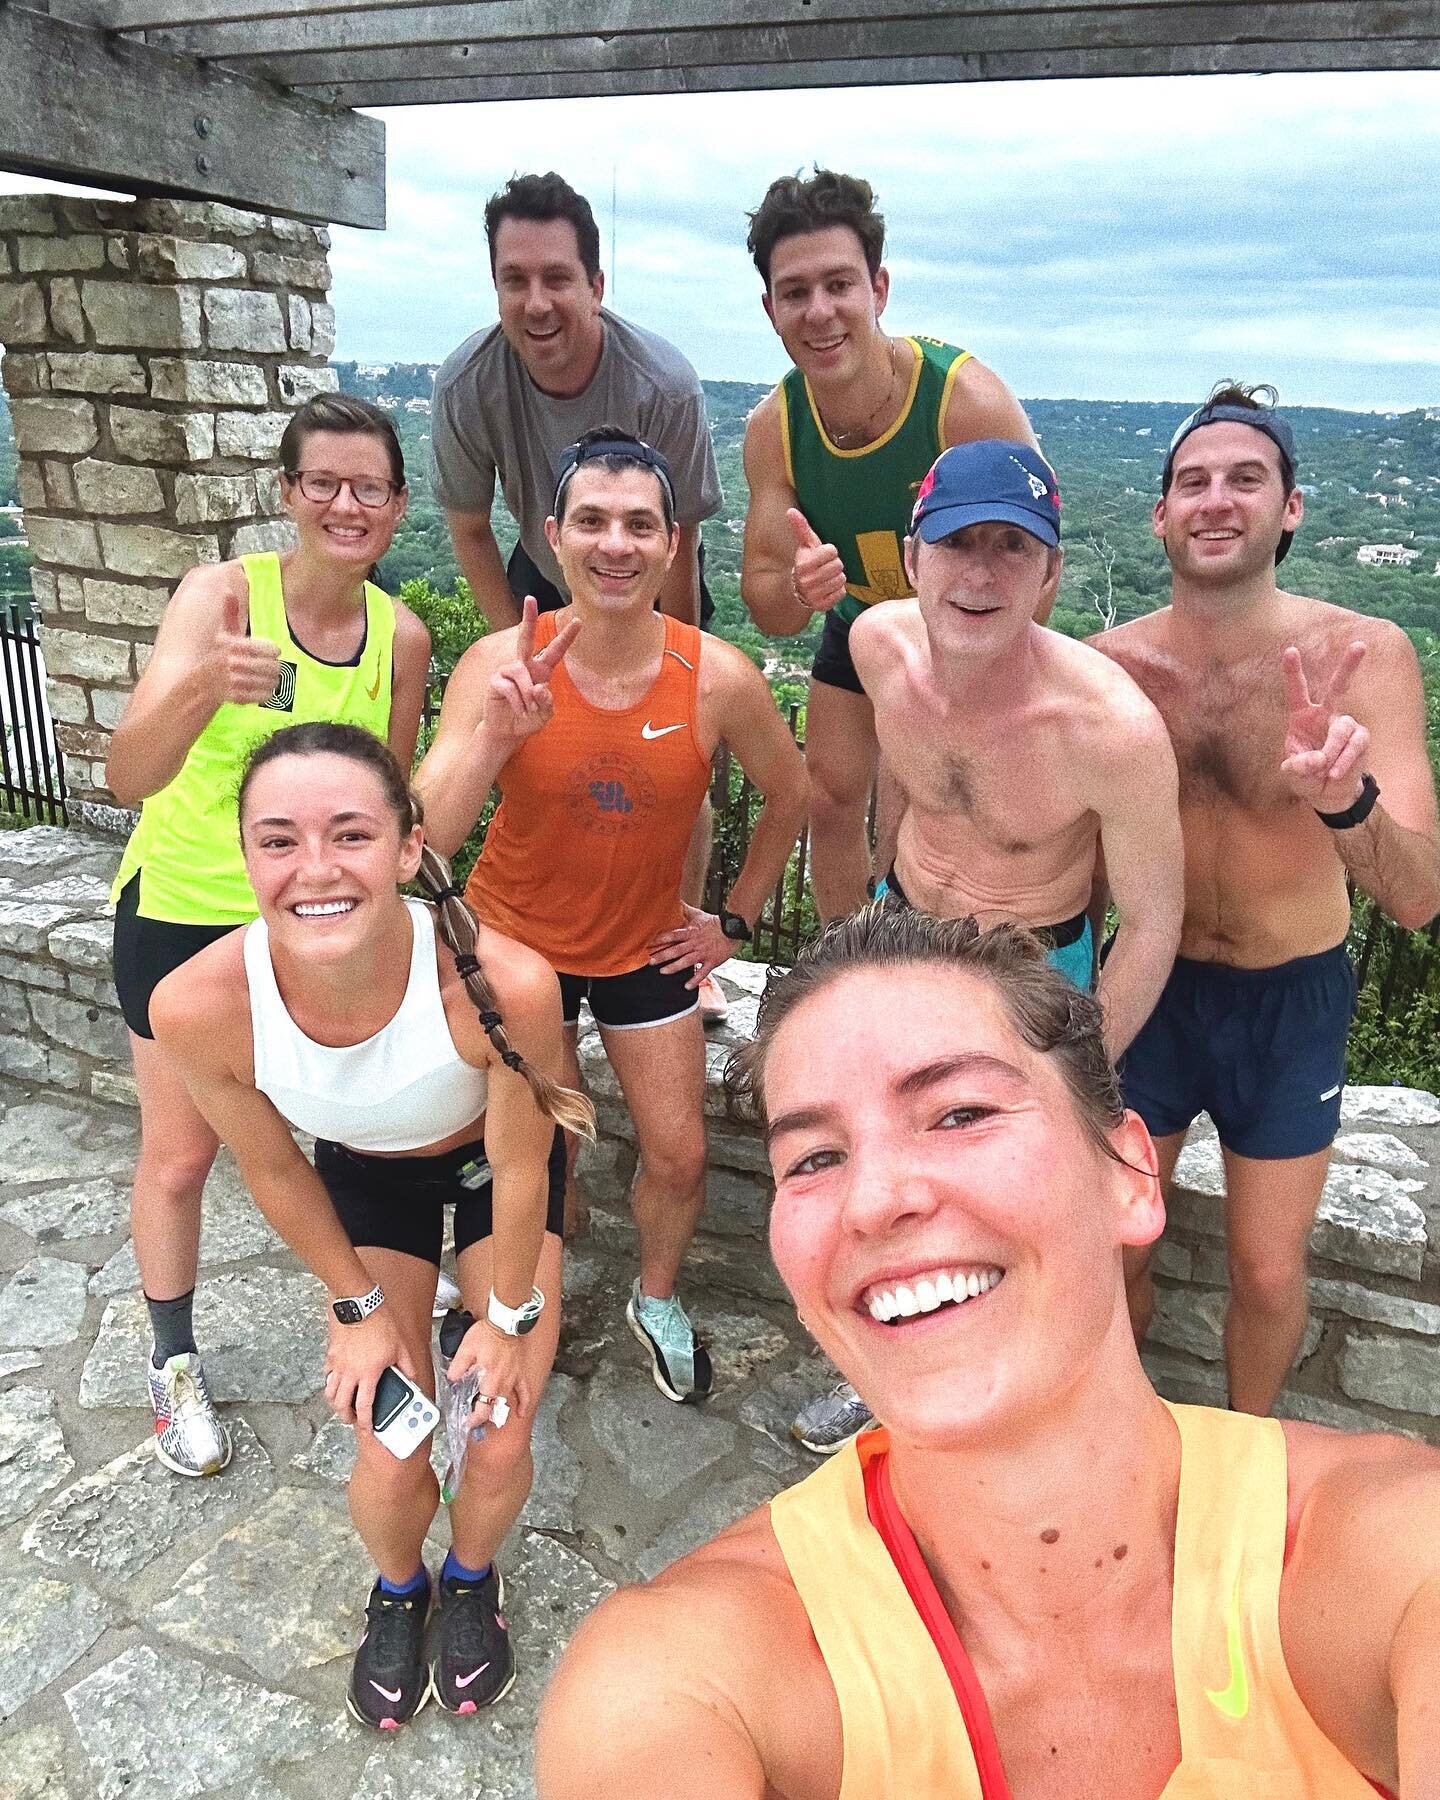 Monthly dose of Mount Bonnell long run 🌄✅

Gazelles and new friends who #RunWithJoy 😊